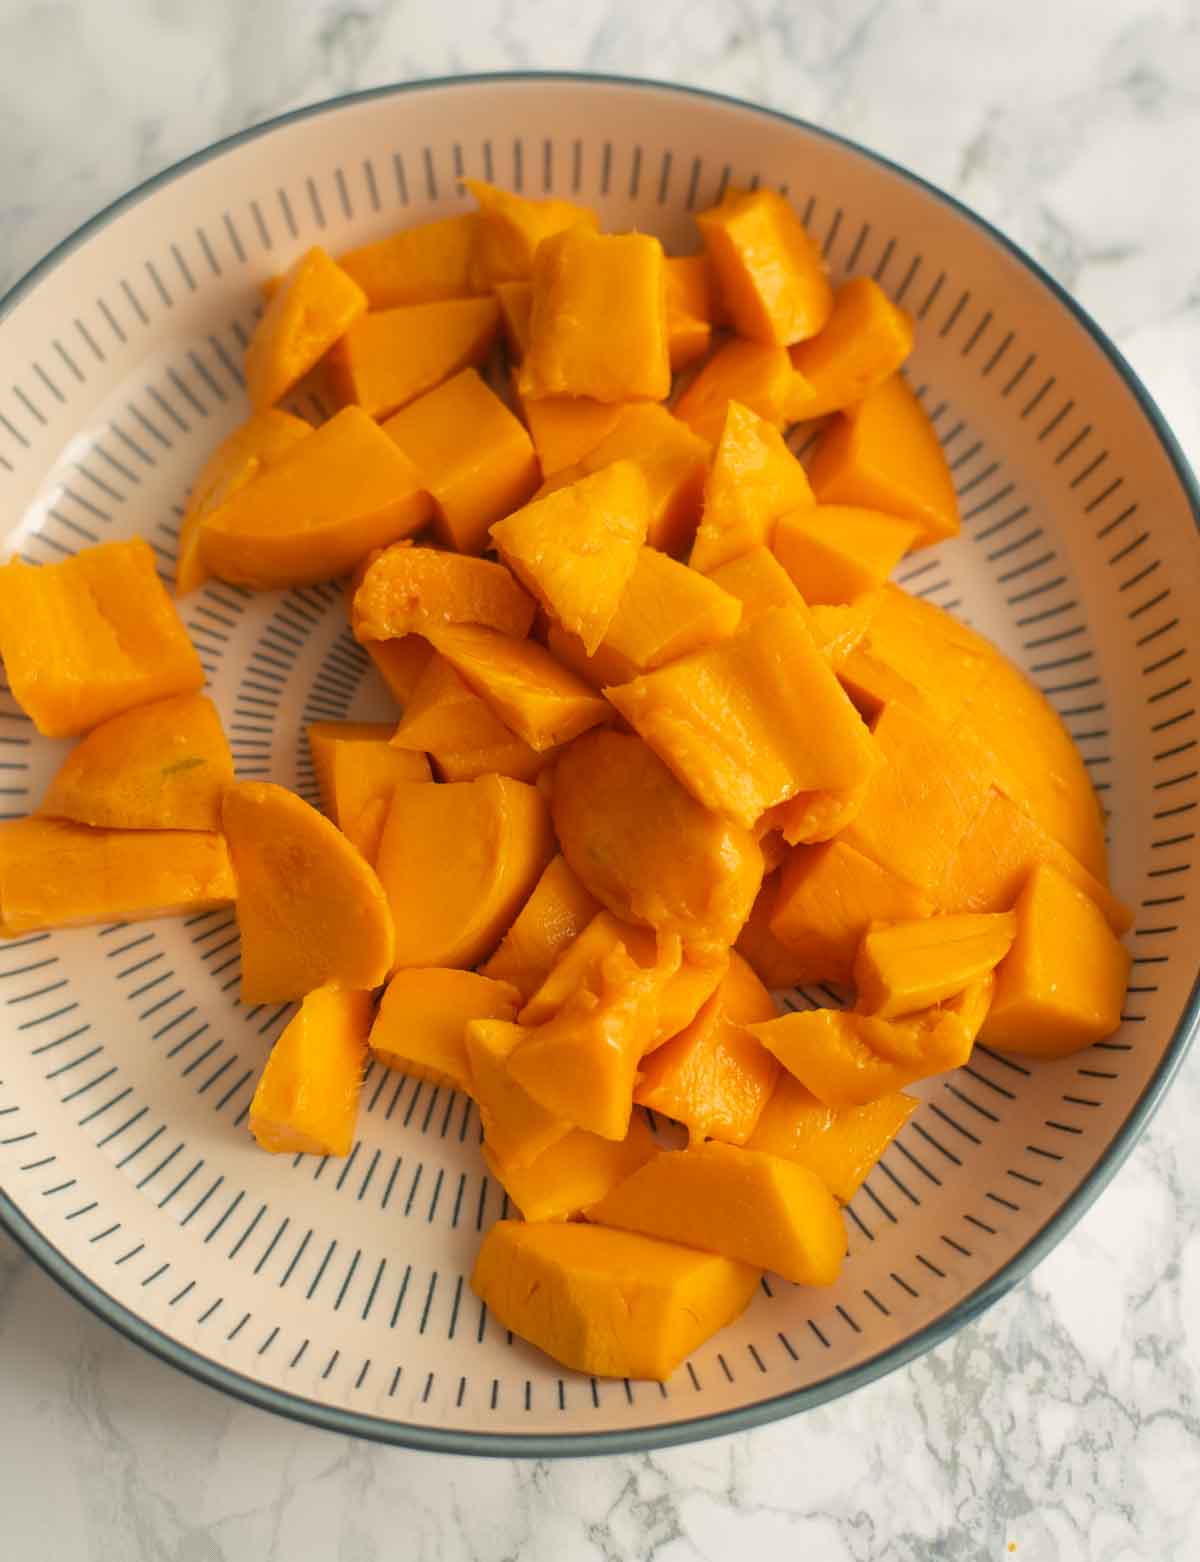 Sliced mango pieces on a plate